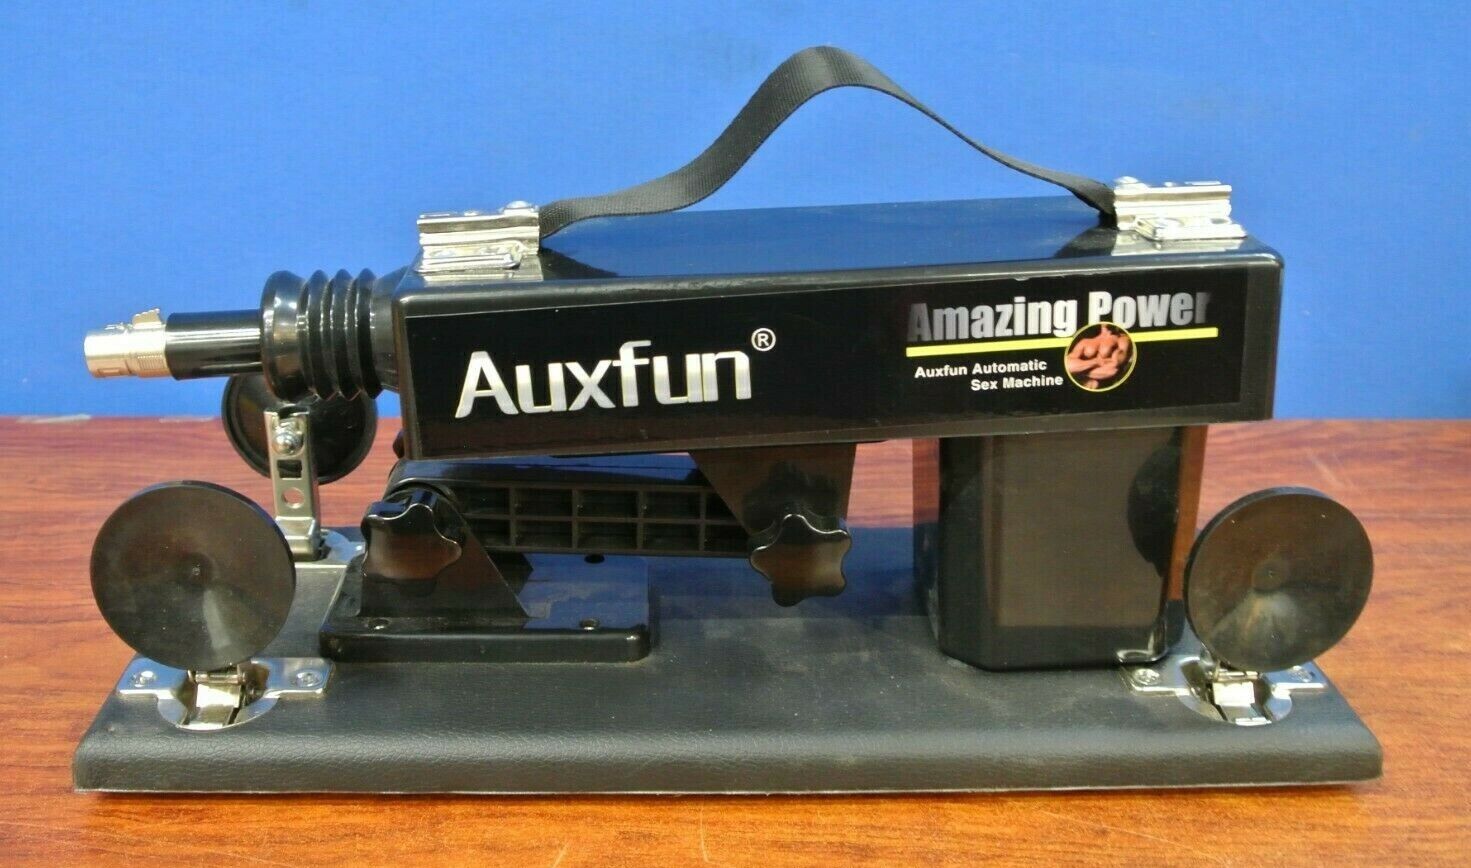 AUXFUN SEX MACHINE - Device ONLY - No Power Cord or Accessories ----(C56)